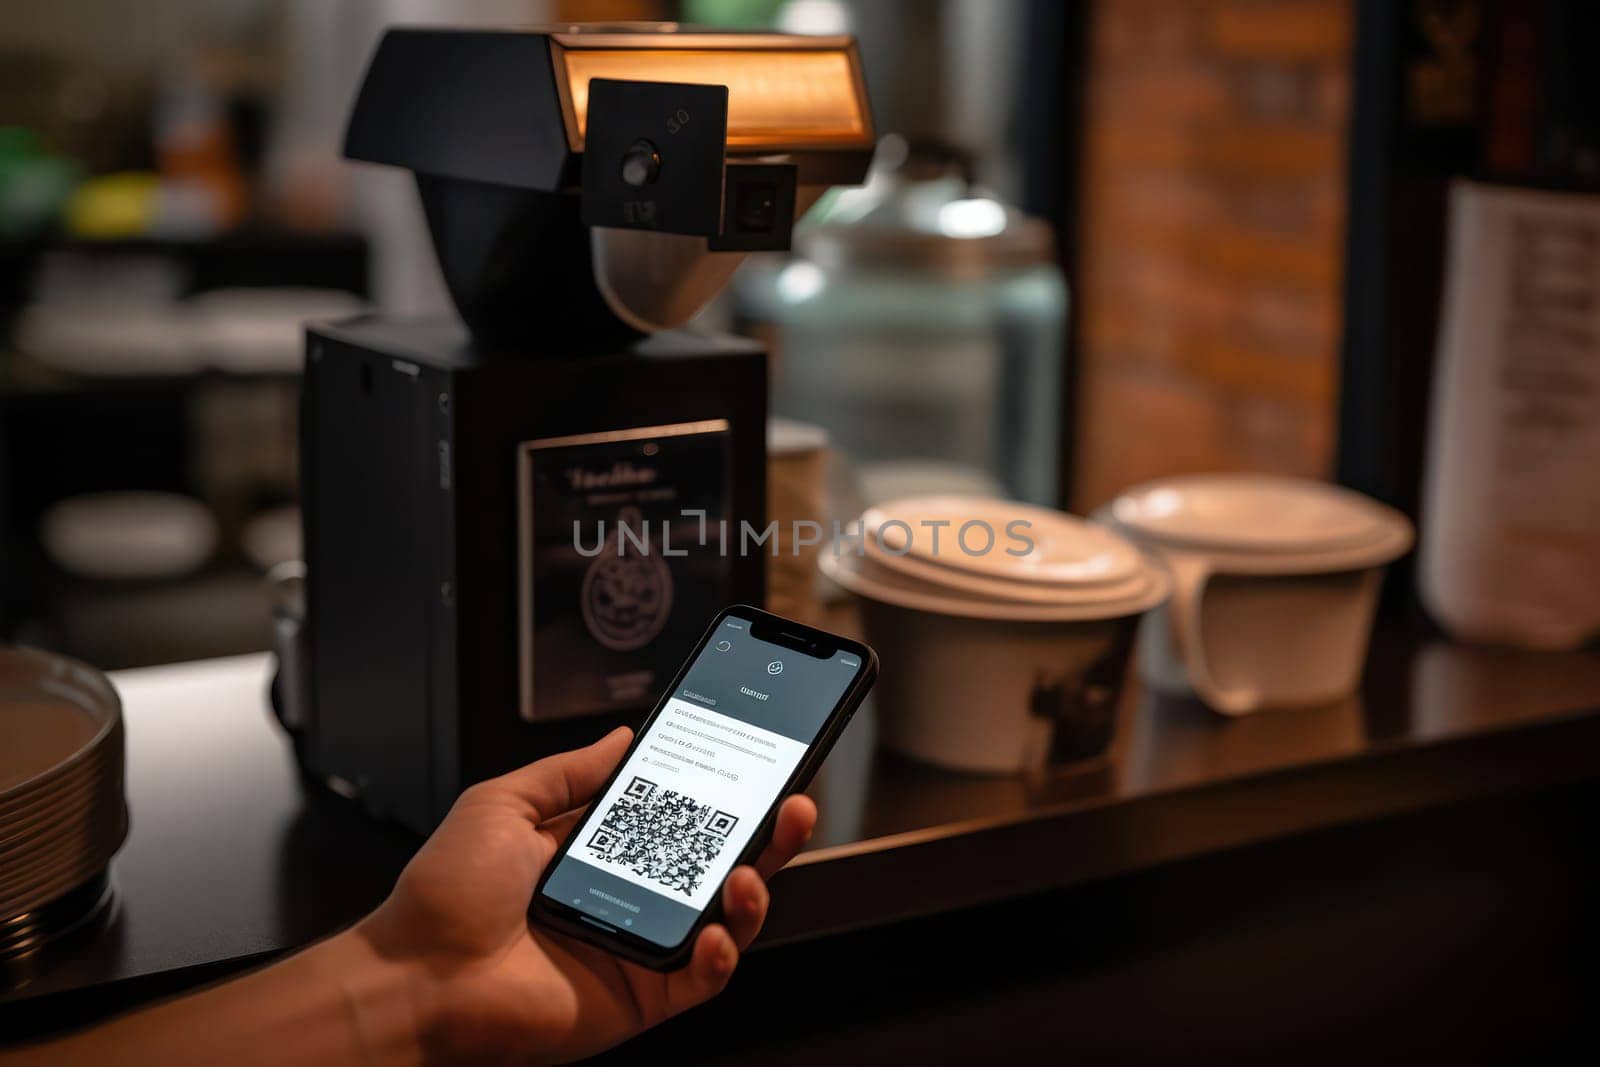 Smartphone-driven Digital Payment Revolution: Handheld Barcode Scanner, Cashier Transactions at Retail Store by Vichizh